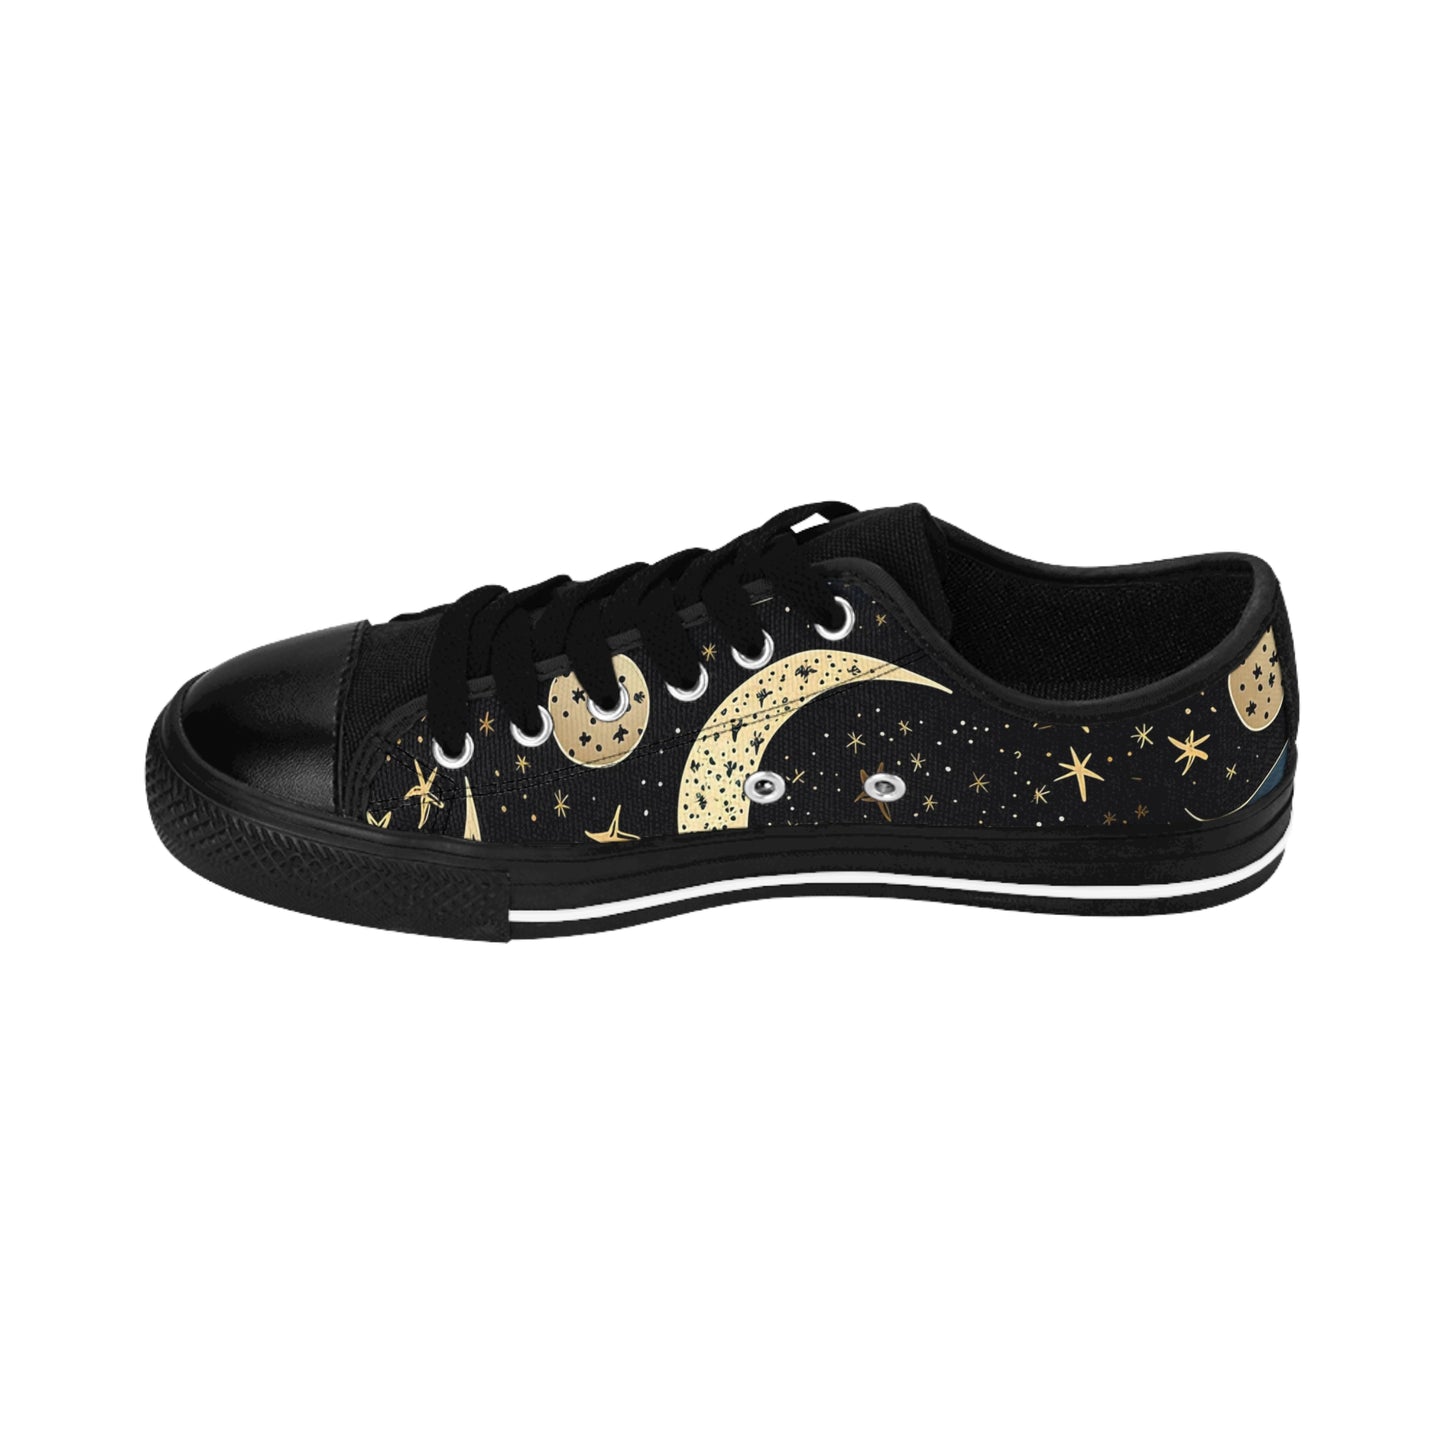 Celestial Moon Women's Sneakers | Starry, Astrological Shoes